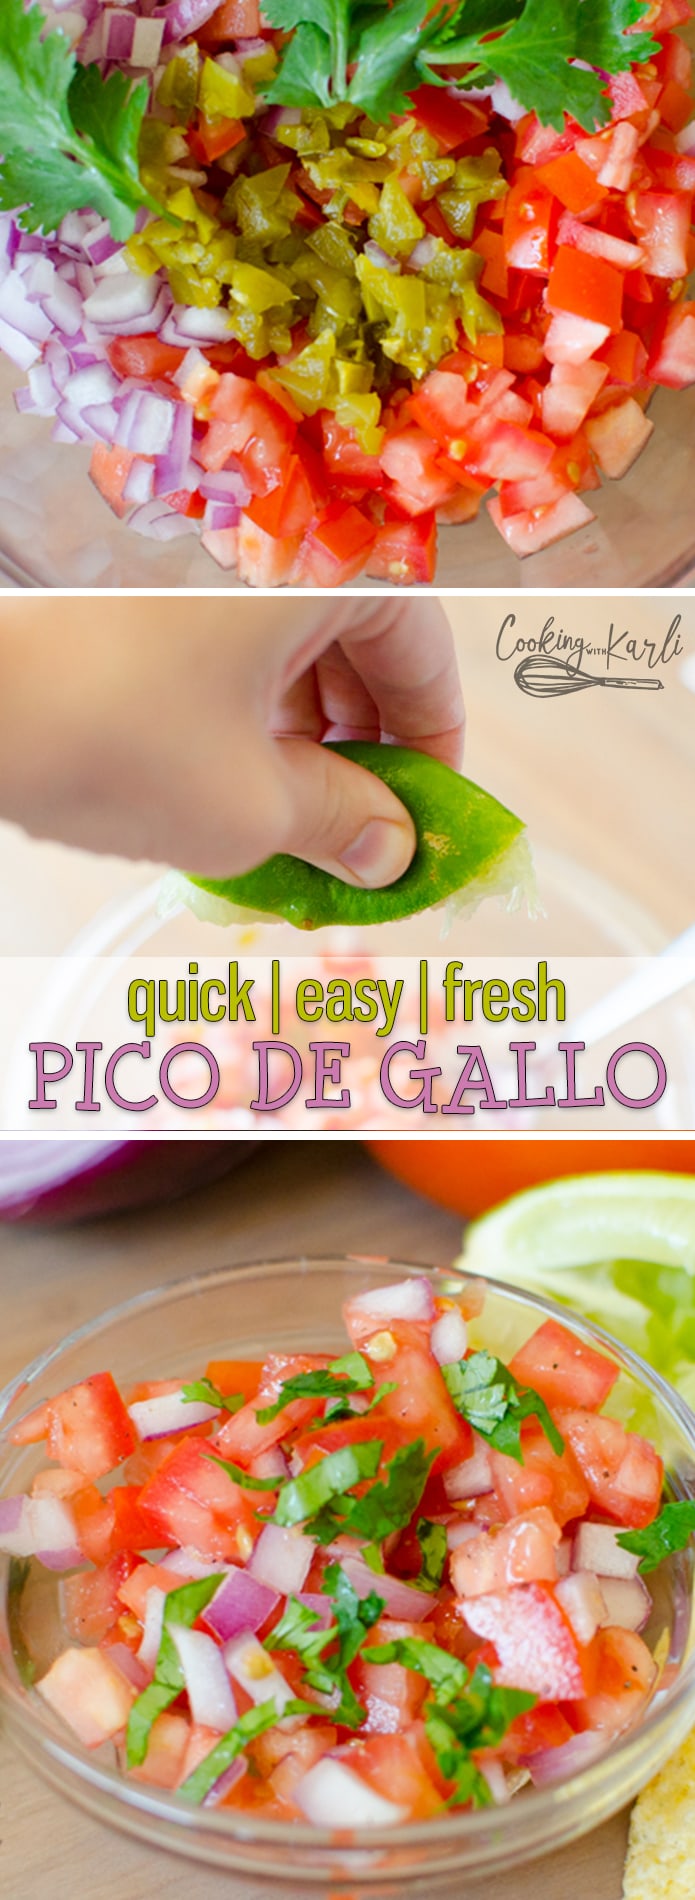 Pico De Gallo is a fresh salsa or Salsa Fresca. The fresh tomato, raw onion, cilantro, fresh lime juice and a hint of jalapeño come together to make a refreshing appetizer or topping.  |Cooking with Karli| #pico #salsa #fresca #recipe #mexican #appetizer #side #fresh 